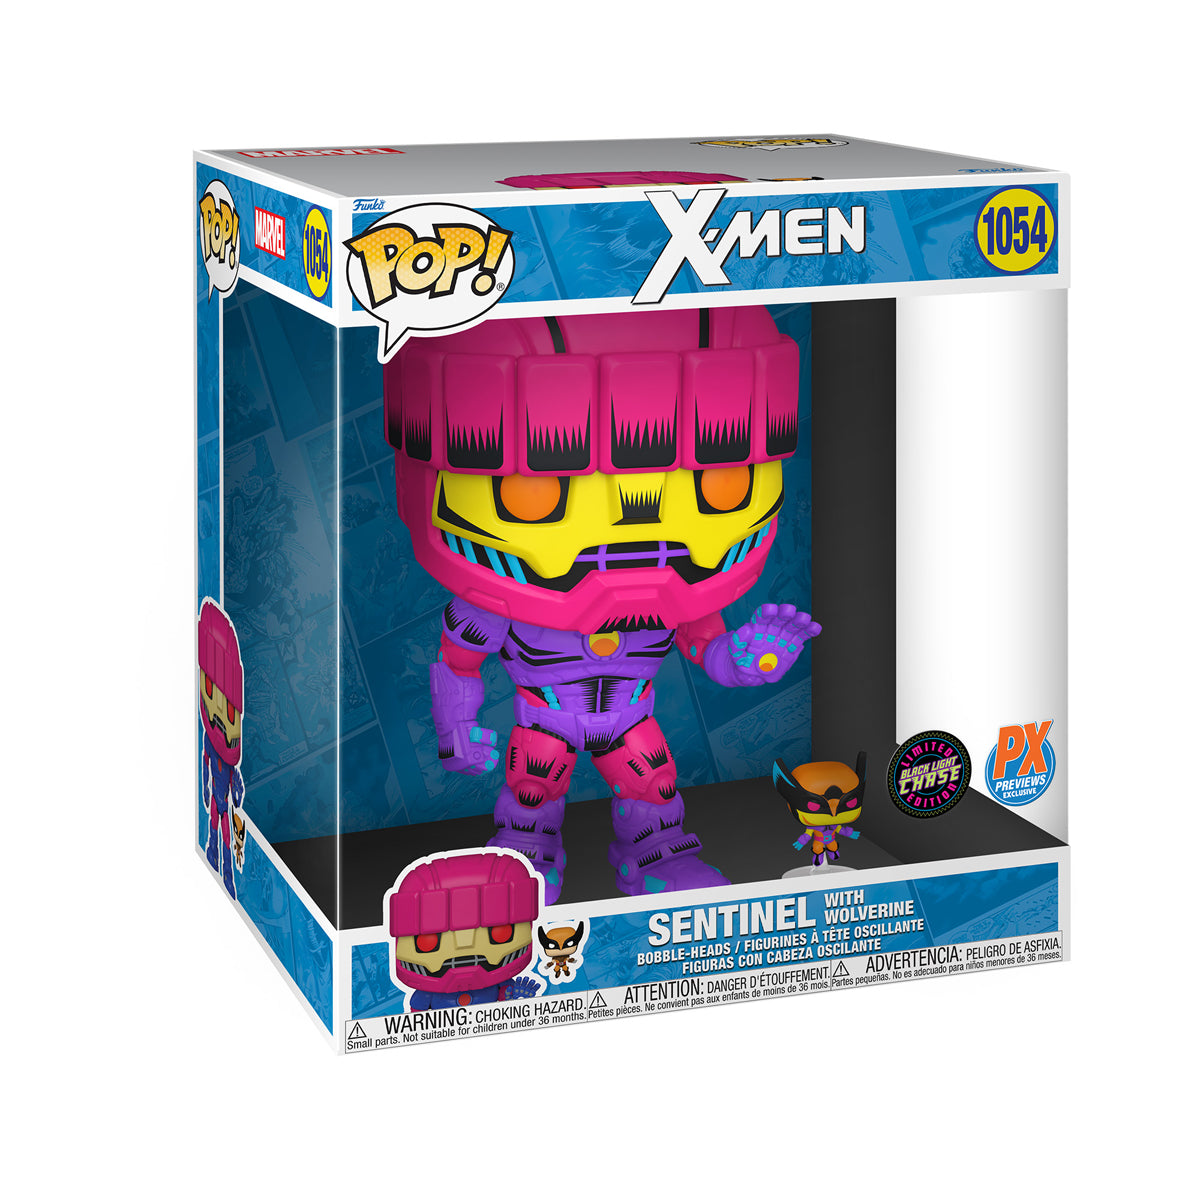 POP Figure (10 Inch): Marvel X-Men #1054 - Sentinel with Wolverine (PX) (Chase)